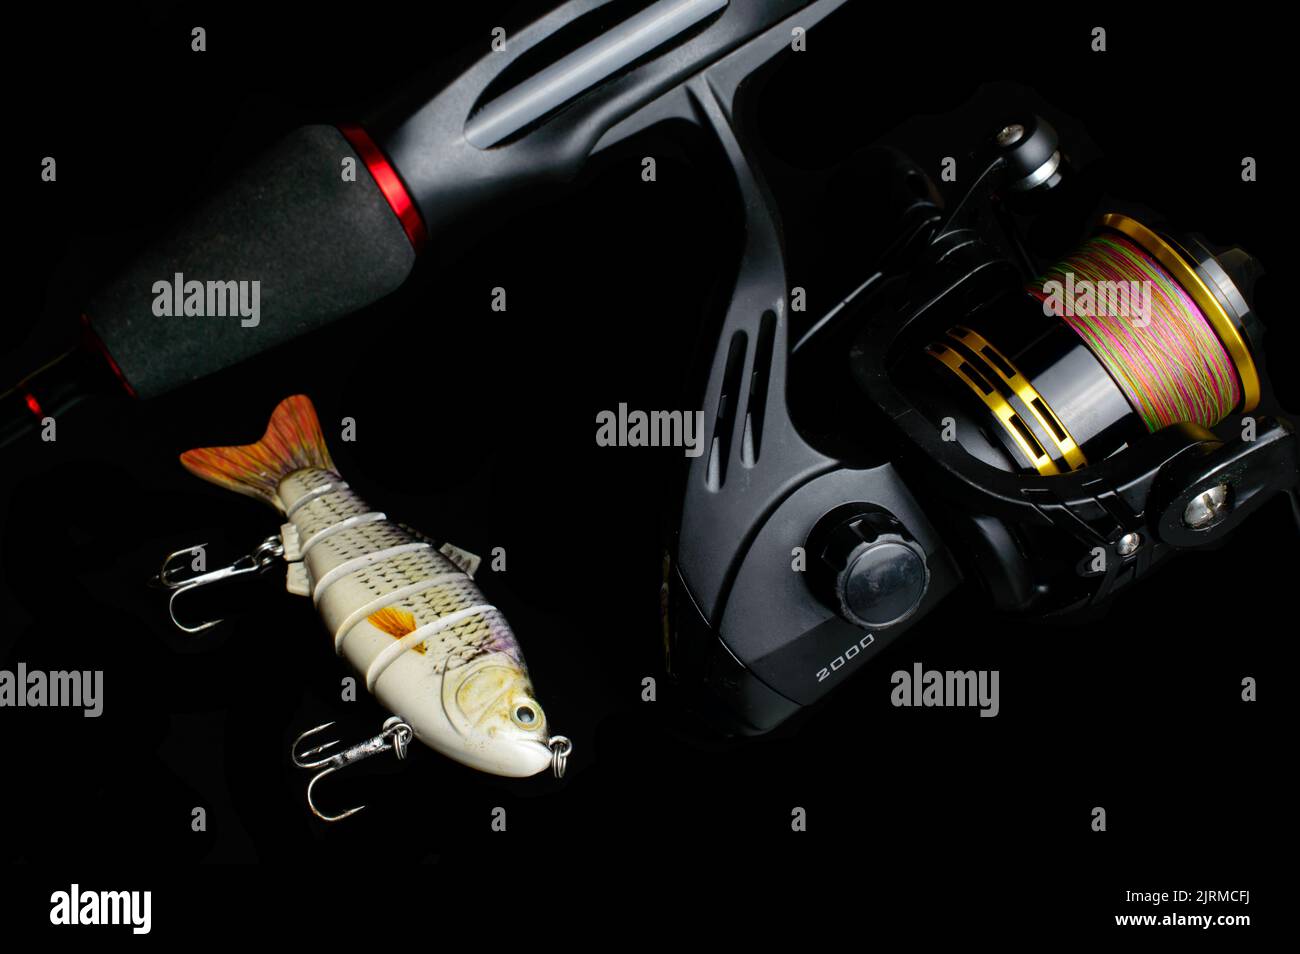 Fishing rod with reel and small lure on a black background. Stock Photo